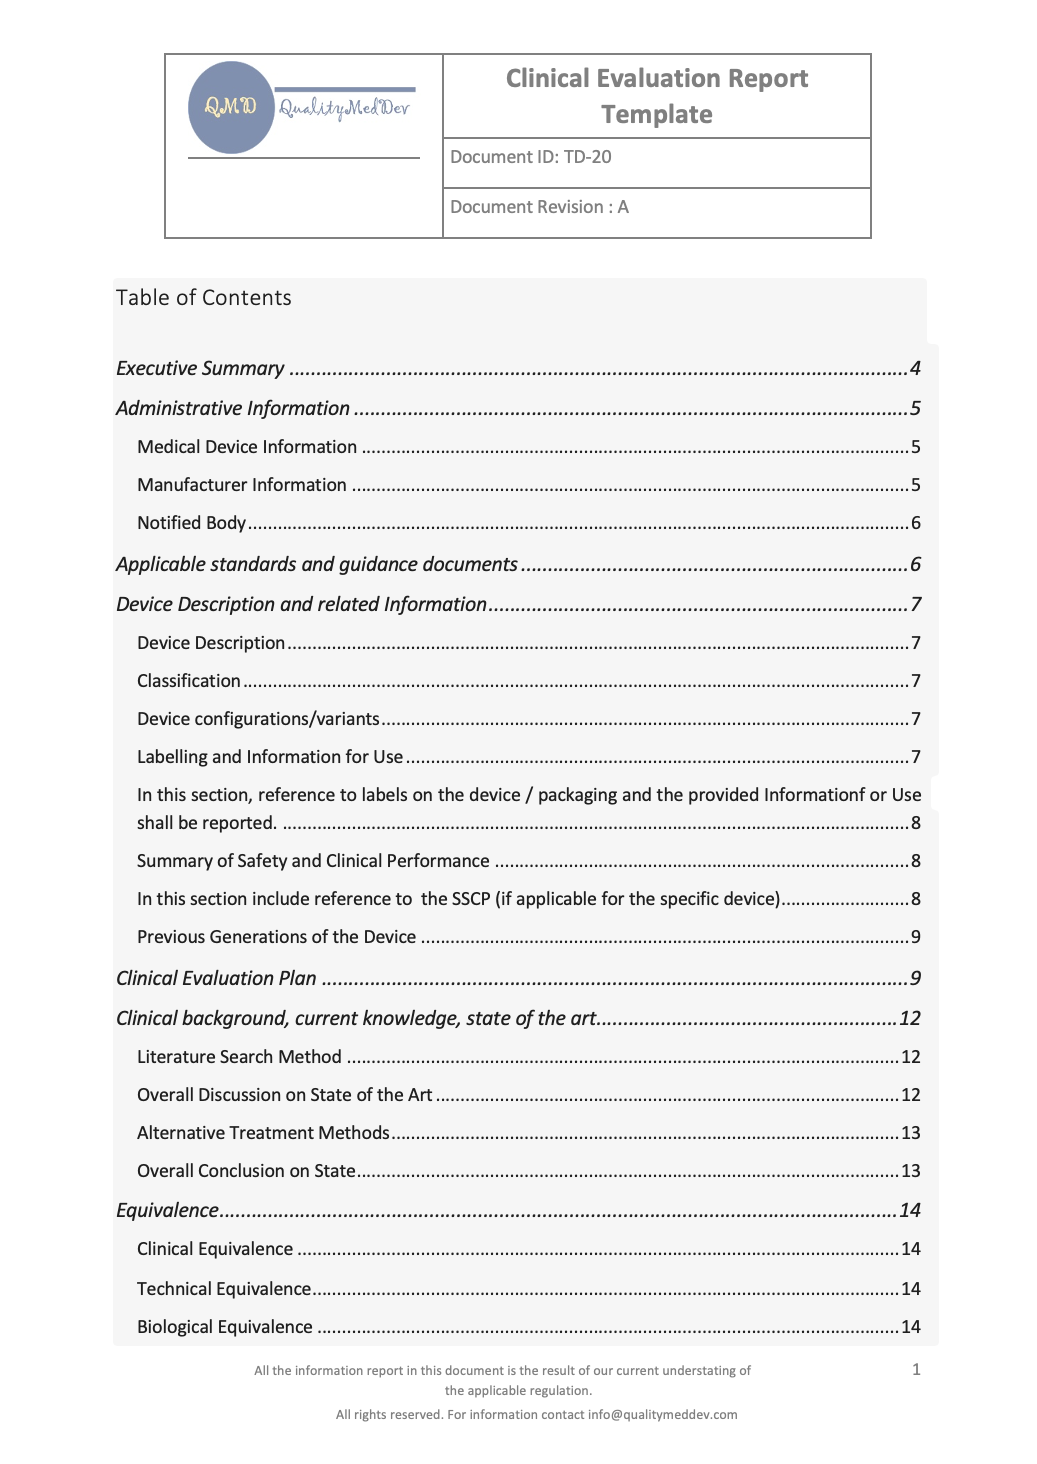 clinical-evaluation-report-template-mdr